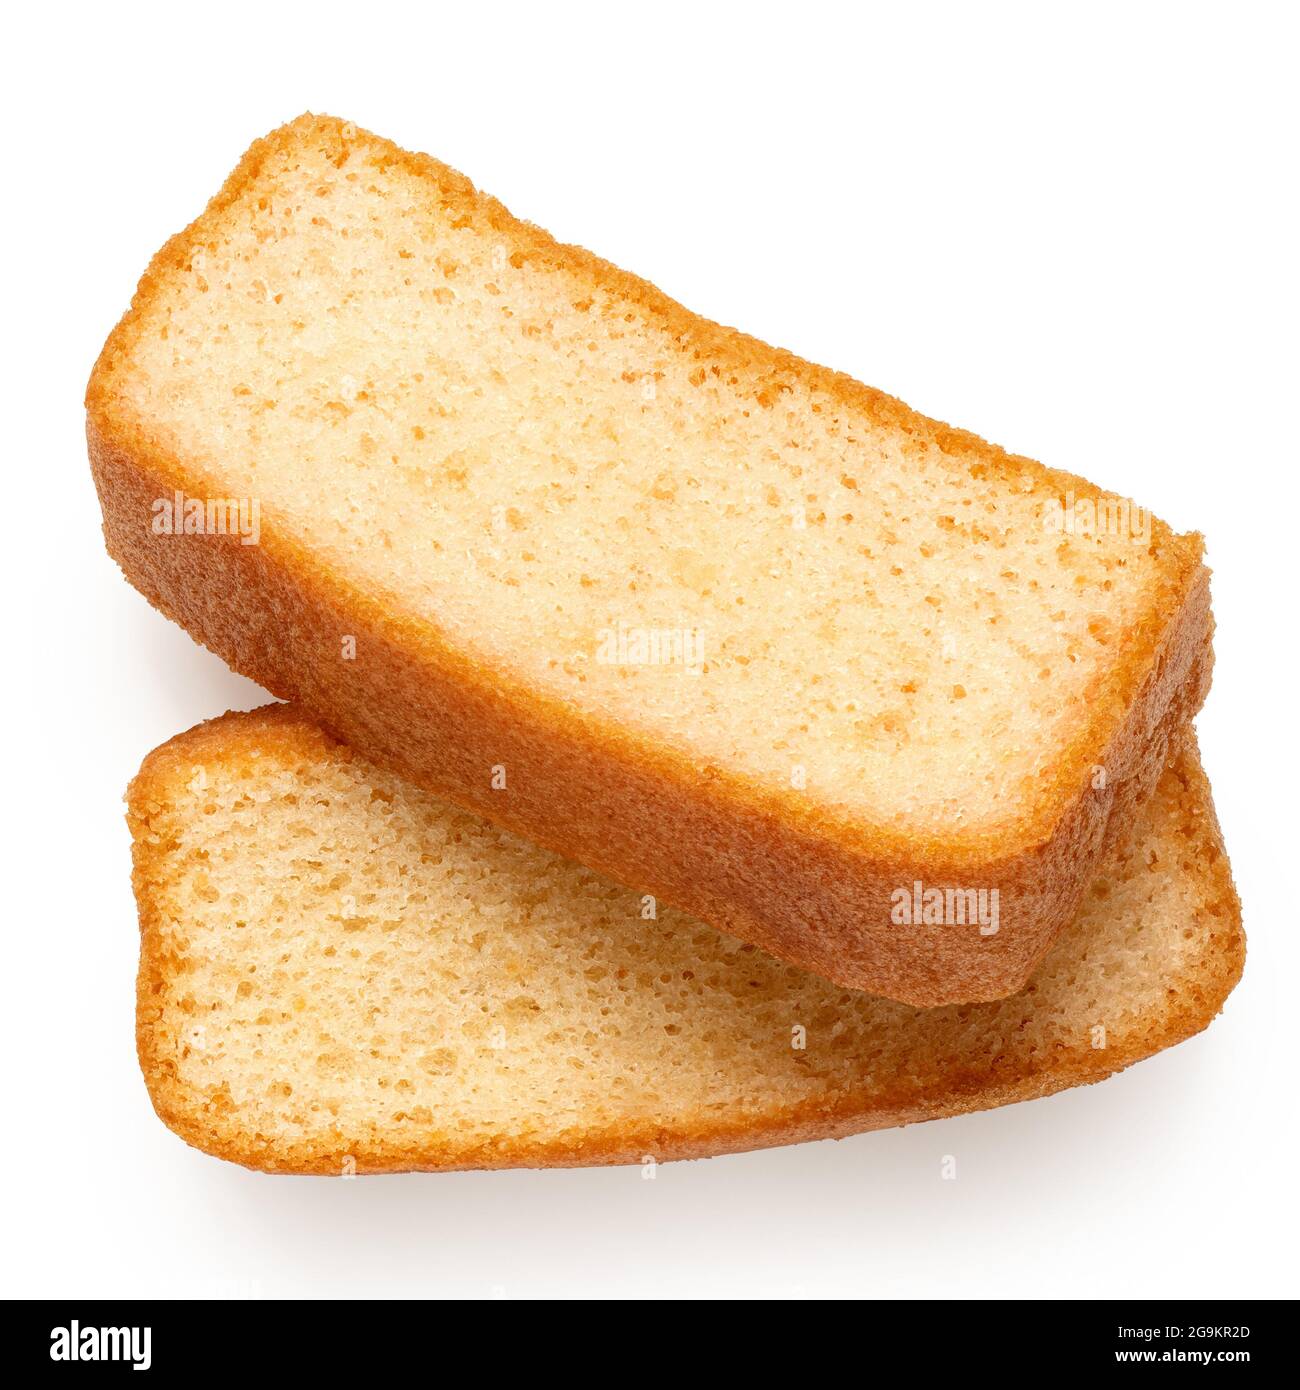 Two slices of plain sponge cake isolated on white. Top view. Stock Photo